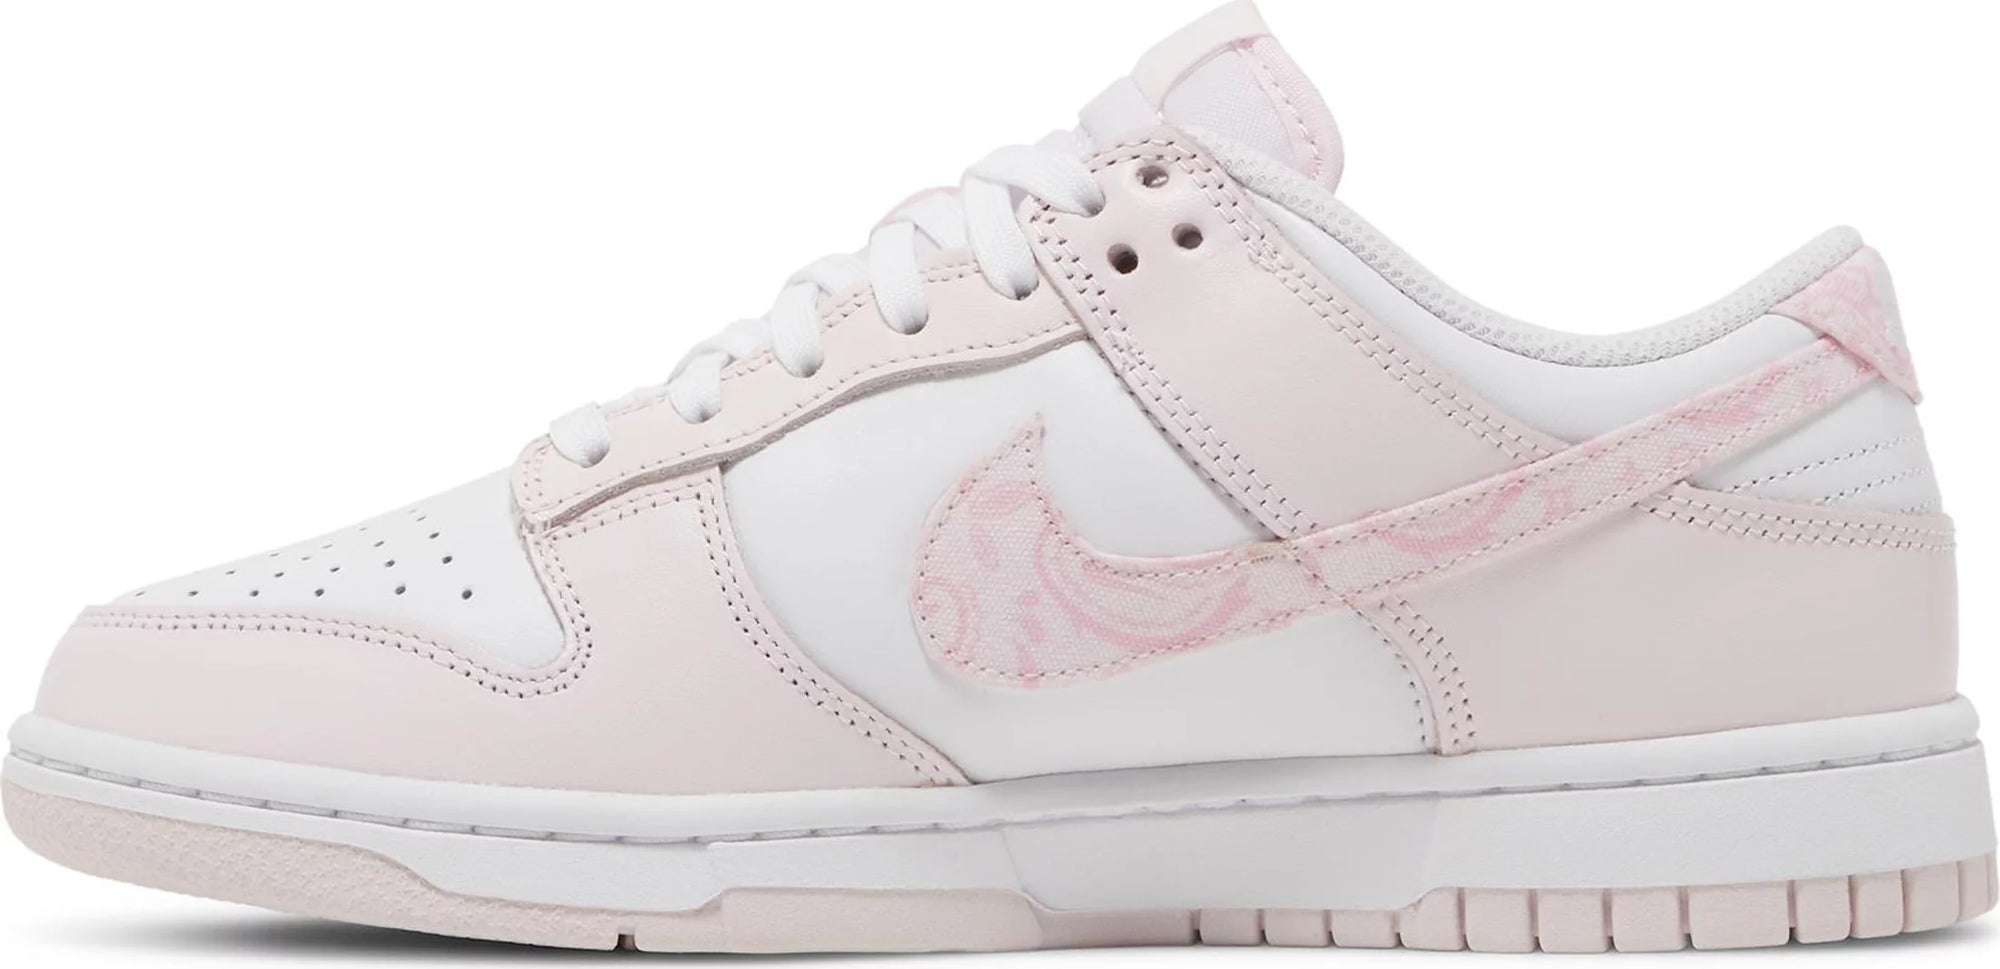 Nike Dunk Low- Paisley Pack Pink